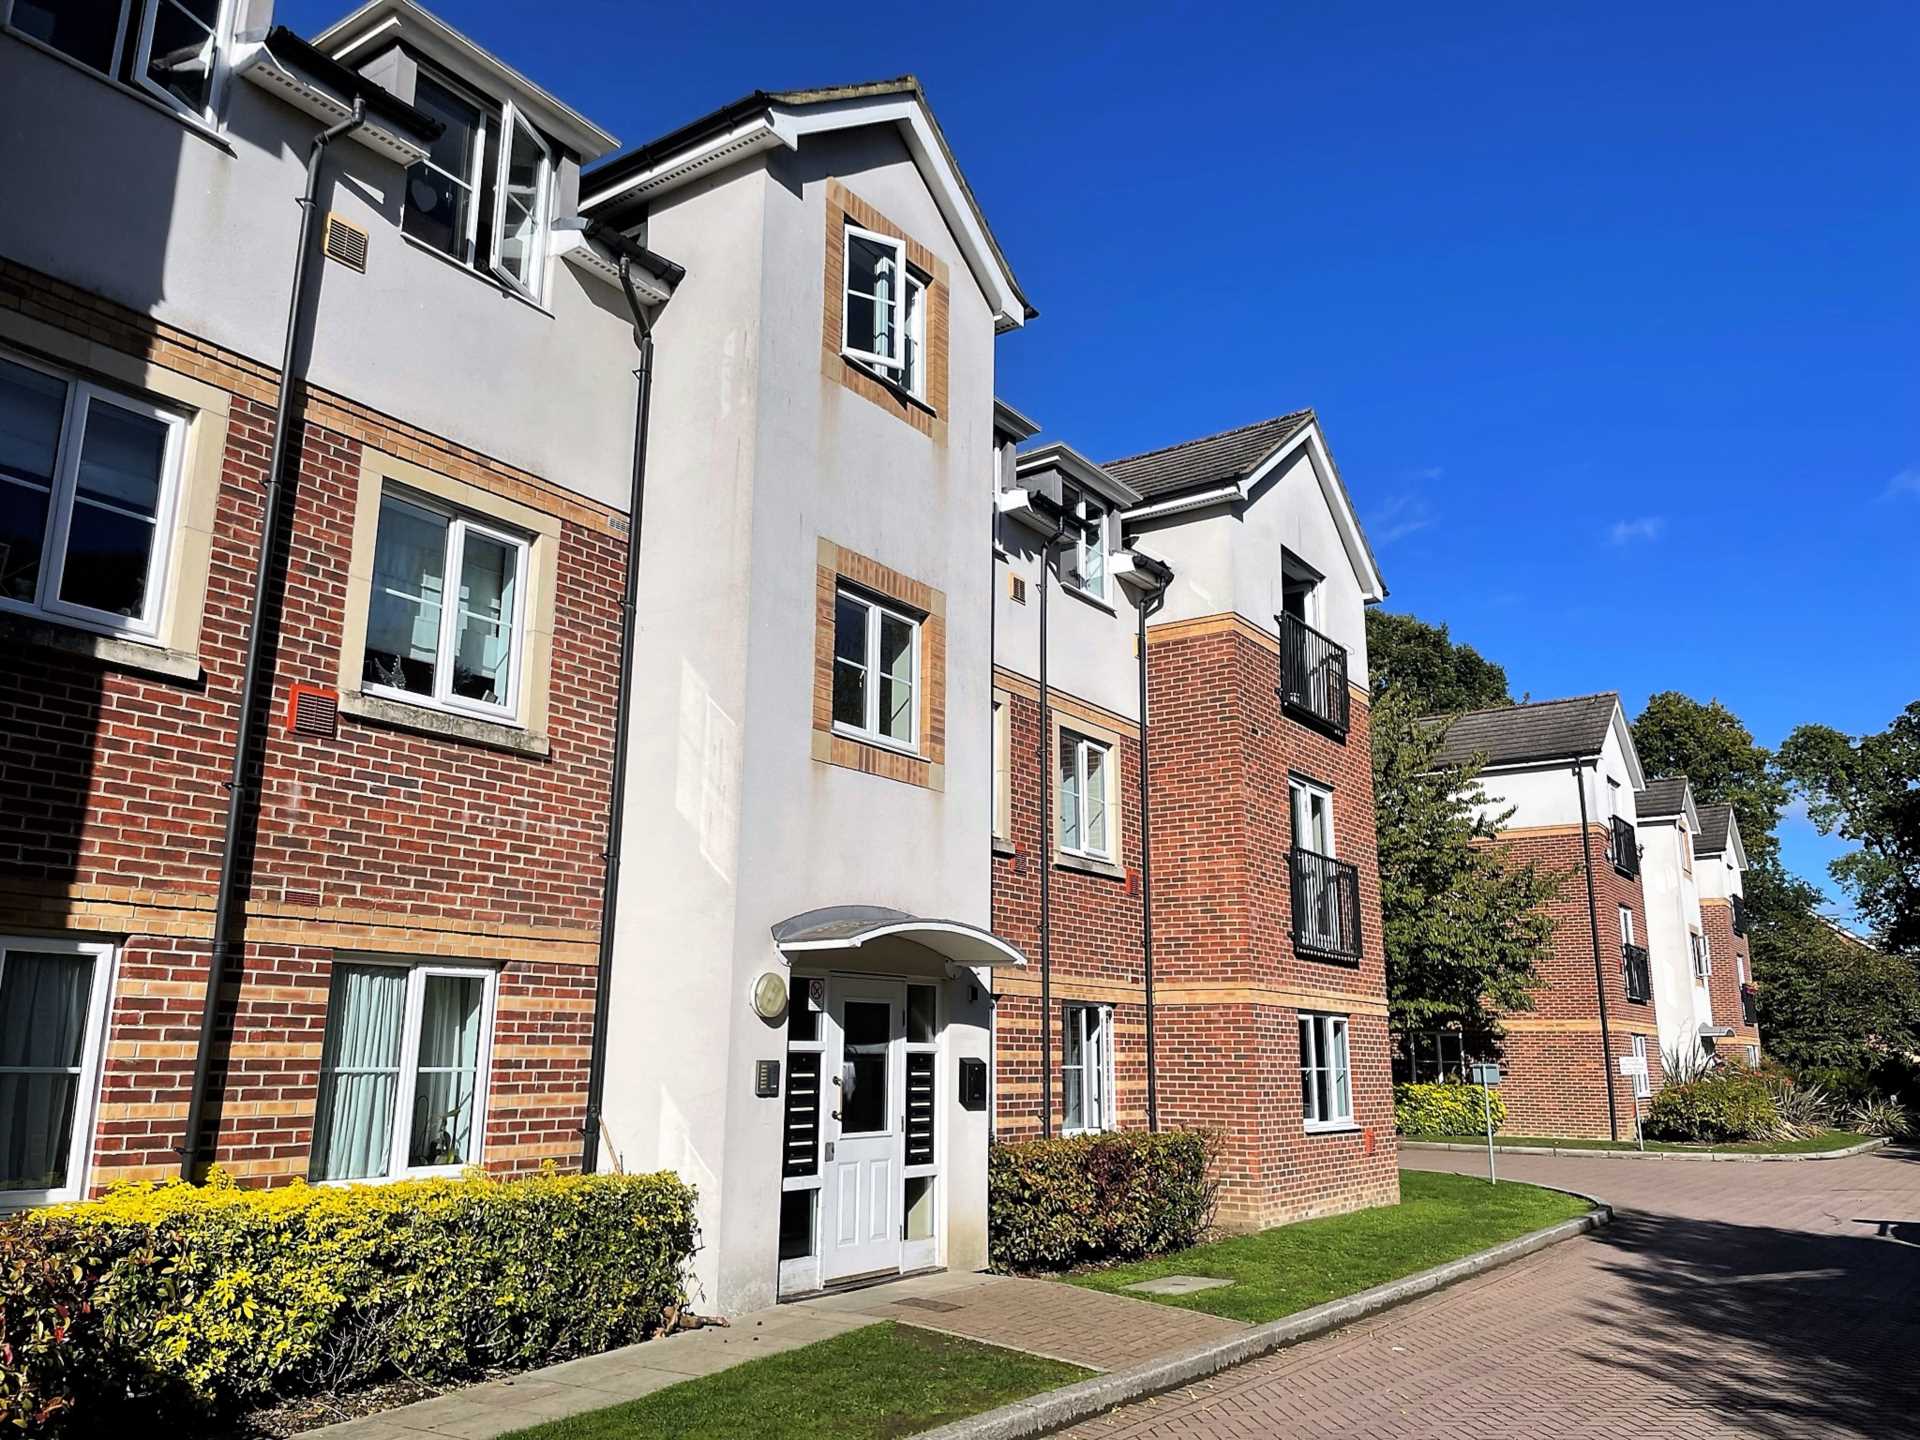 Kingswood Close, Camberley, Image 1